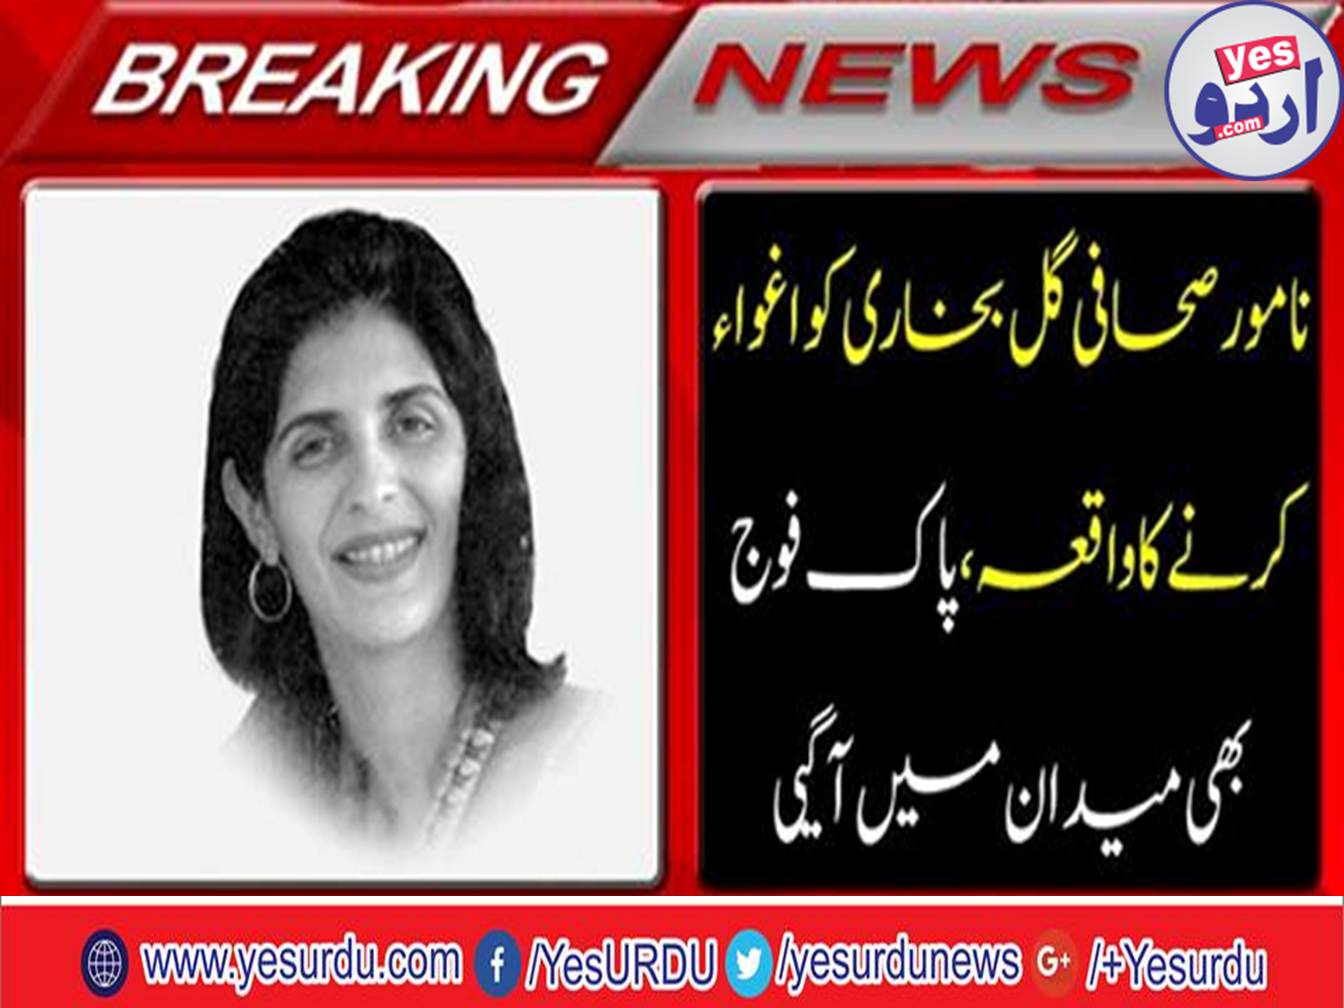 Eventually kidnapped journalist Gul Bukhari, army also came forward